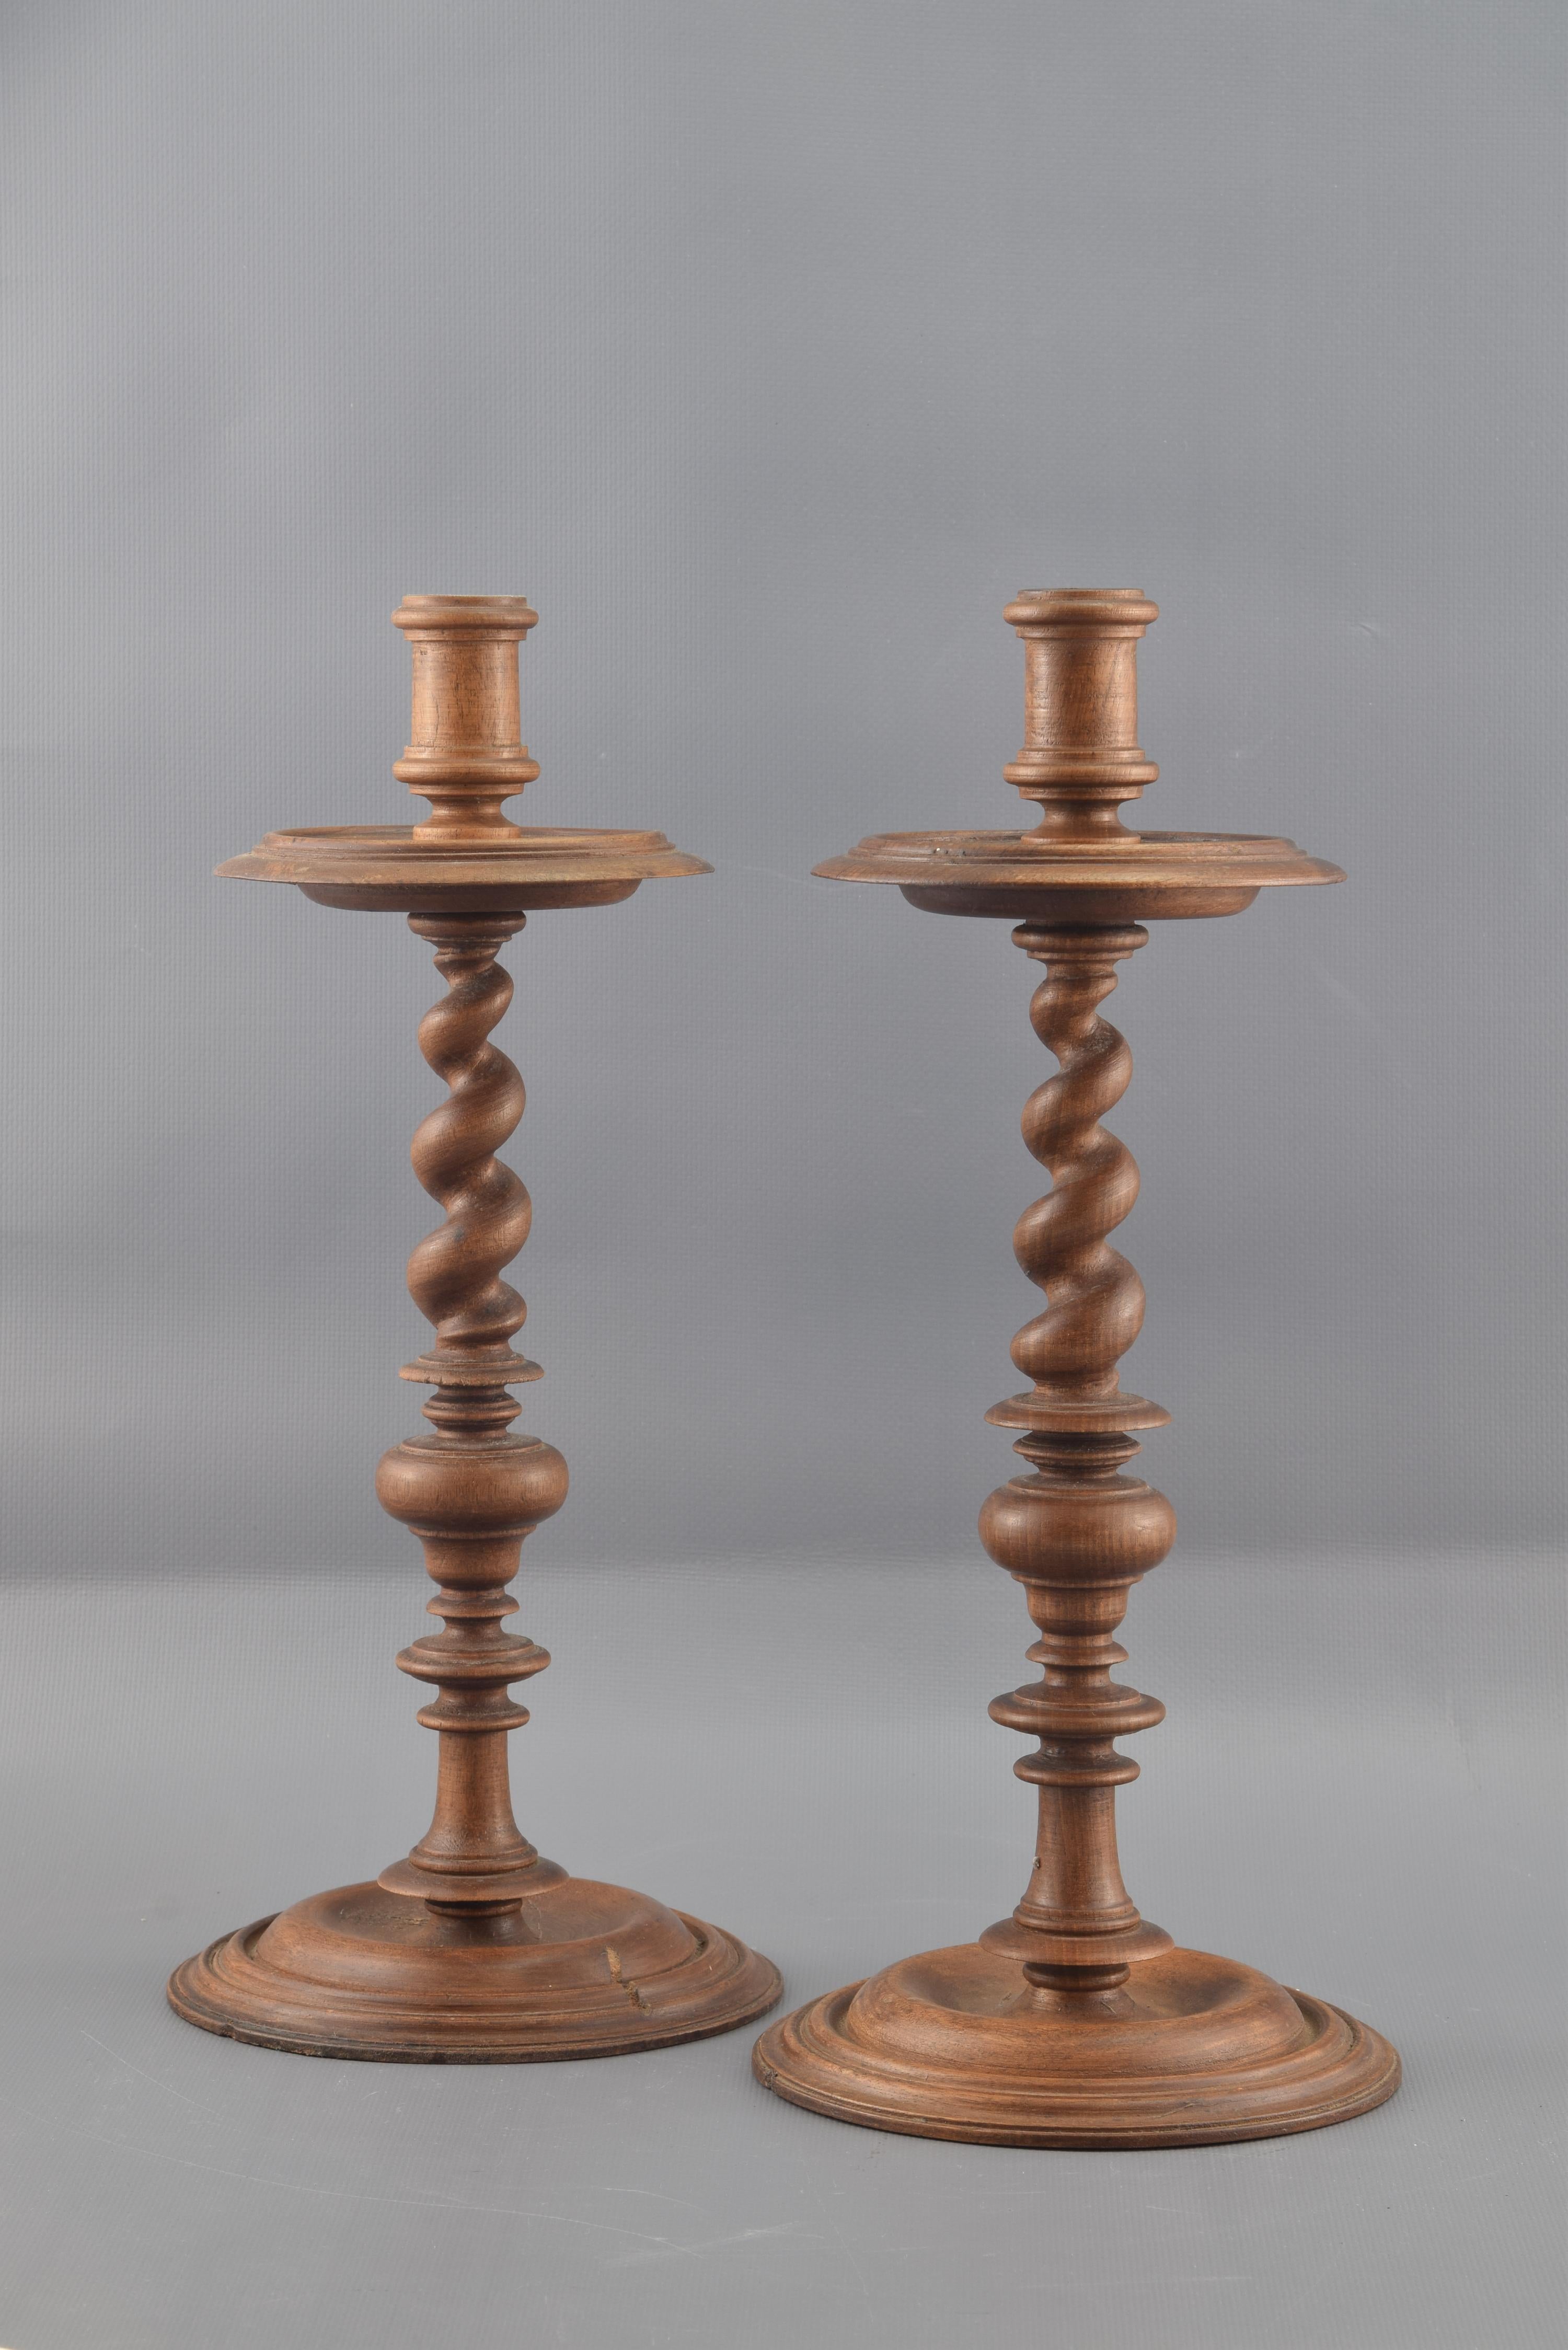 Other Pair of Candleholders, Turned Wood, 20th Century